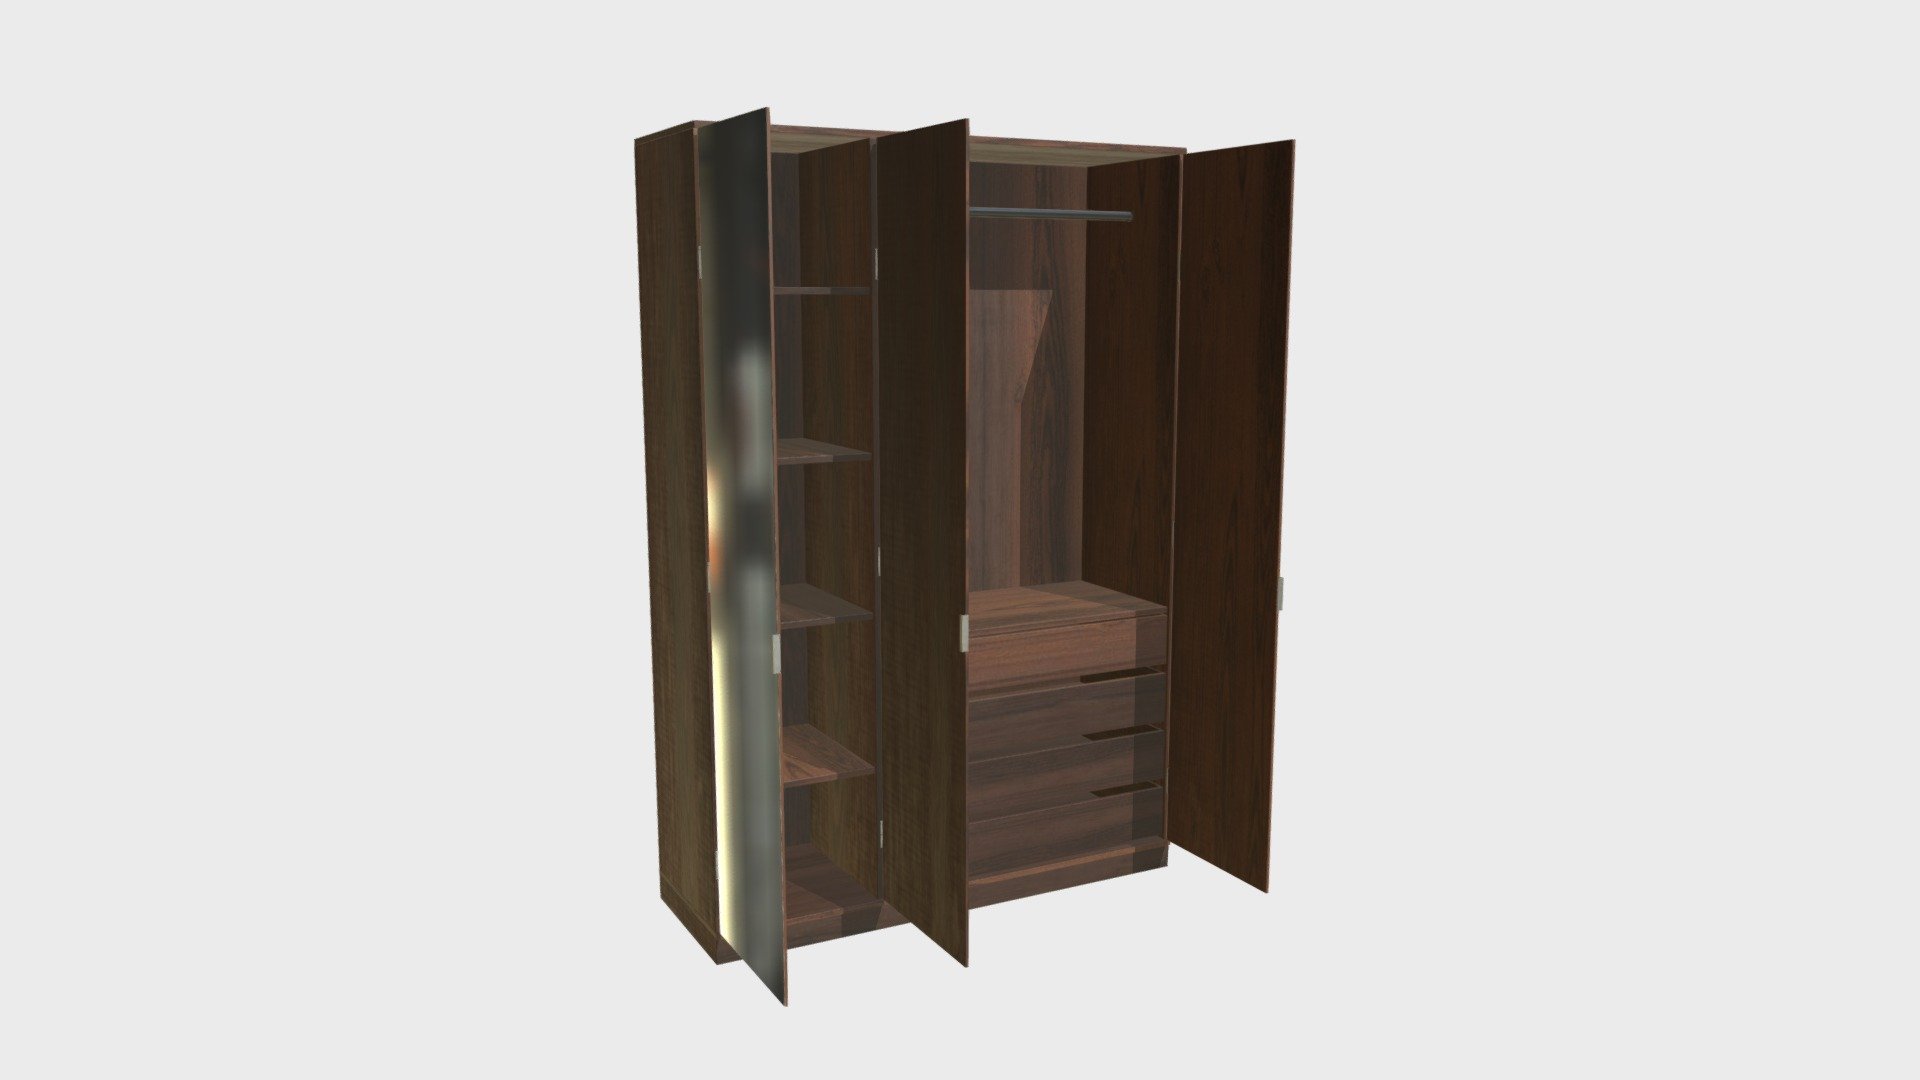 === The following description refers to the additional ZIP package provided with this model ===

Three-door wardrobe 3D Model. 14 individual objects (doors, trays, drawers, bar, &hellip;), sharing the same non overlapping UV Layout map, Material and PBR Textures set. Production-ready 3D Model, with PBR materials, textures, non overlapping UV Layout map provided in the package.

Quads only geometries (no tris/ngons).

Formats included: FBX, OBJ; scenes: BLEND (with Cycles / Eevee PBR Materials and Textures); other: png with Alpha.

14 Objects (meshes), 1 PBR Material, UV unwrapped (non overlapping UV Layout map provided in the package); UV-mapped Textures.

UV Layout maps and Image Textures resolutions: 2048x2048; PBR Textures made with Substance Painter.

Polygonal, QUADS ONLY (no tris/ngons); 15022 vertices, 14368 quad faces (28736 tris).

Real world dimensions; scene scale units: cm in Blender 3.3 (that is: Metric with 0.01 scale).

Uniform scale object (scale applied in Blender 3.3) 3d model